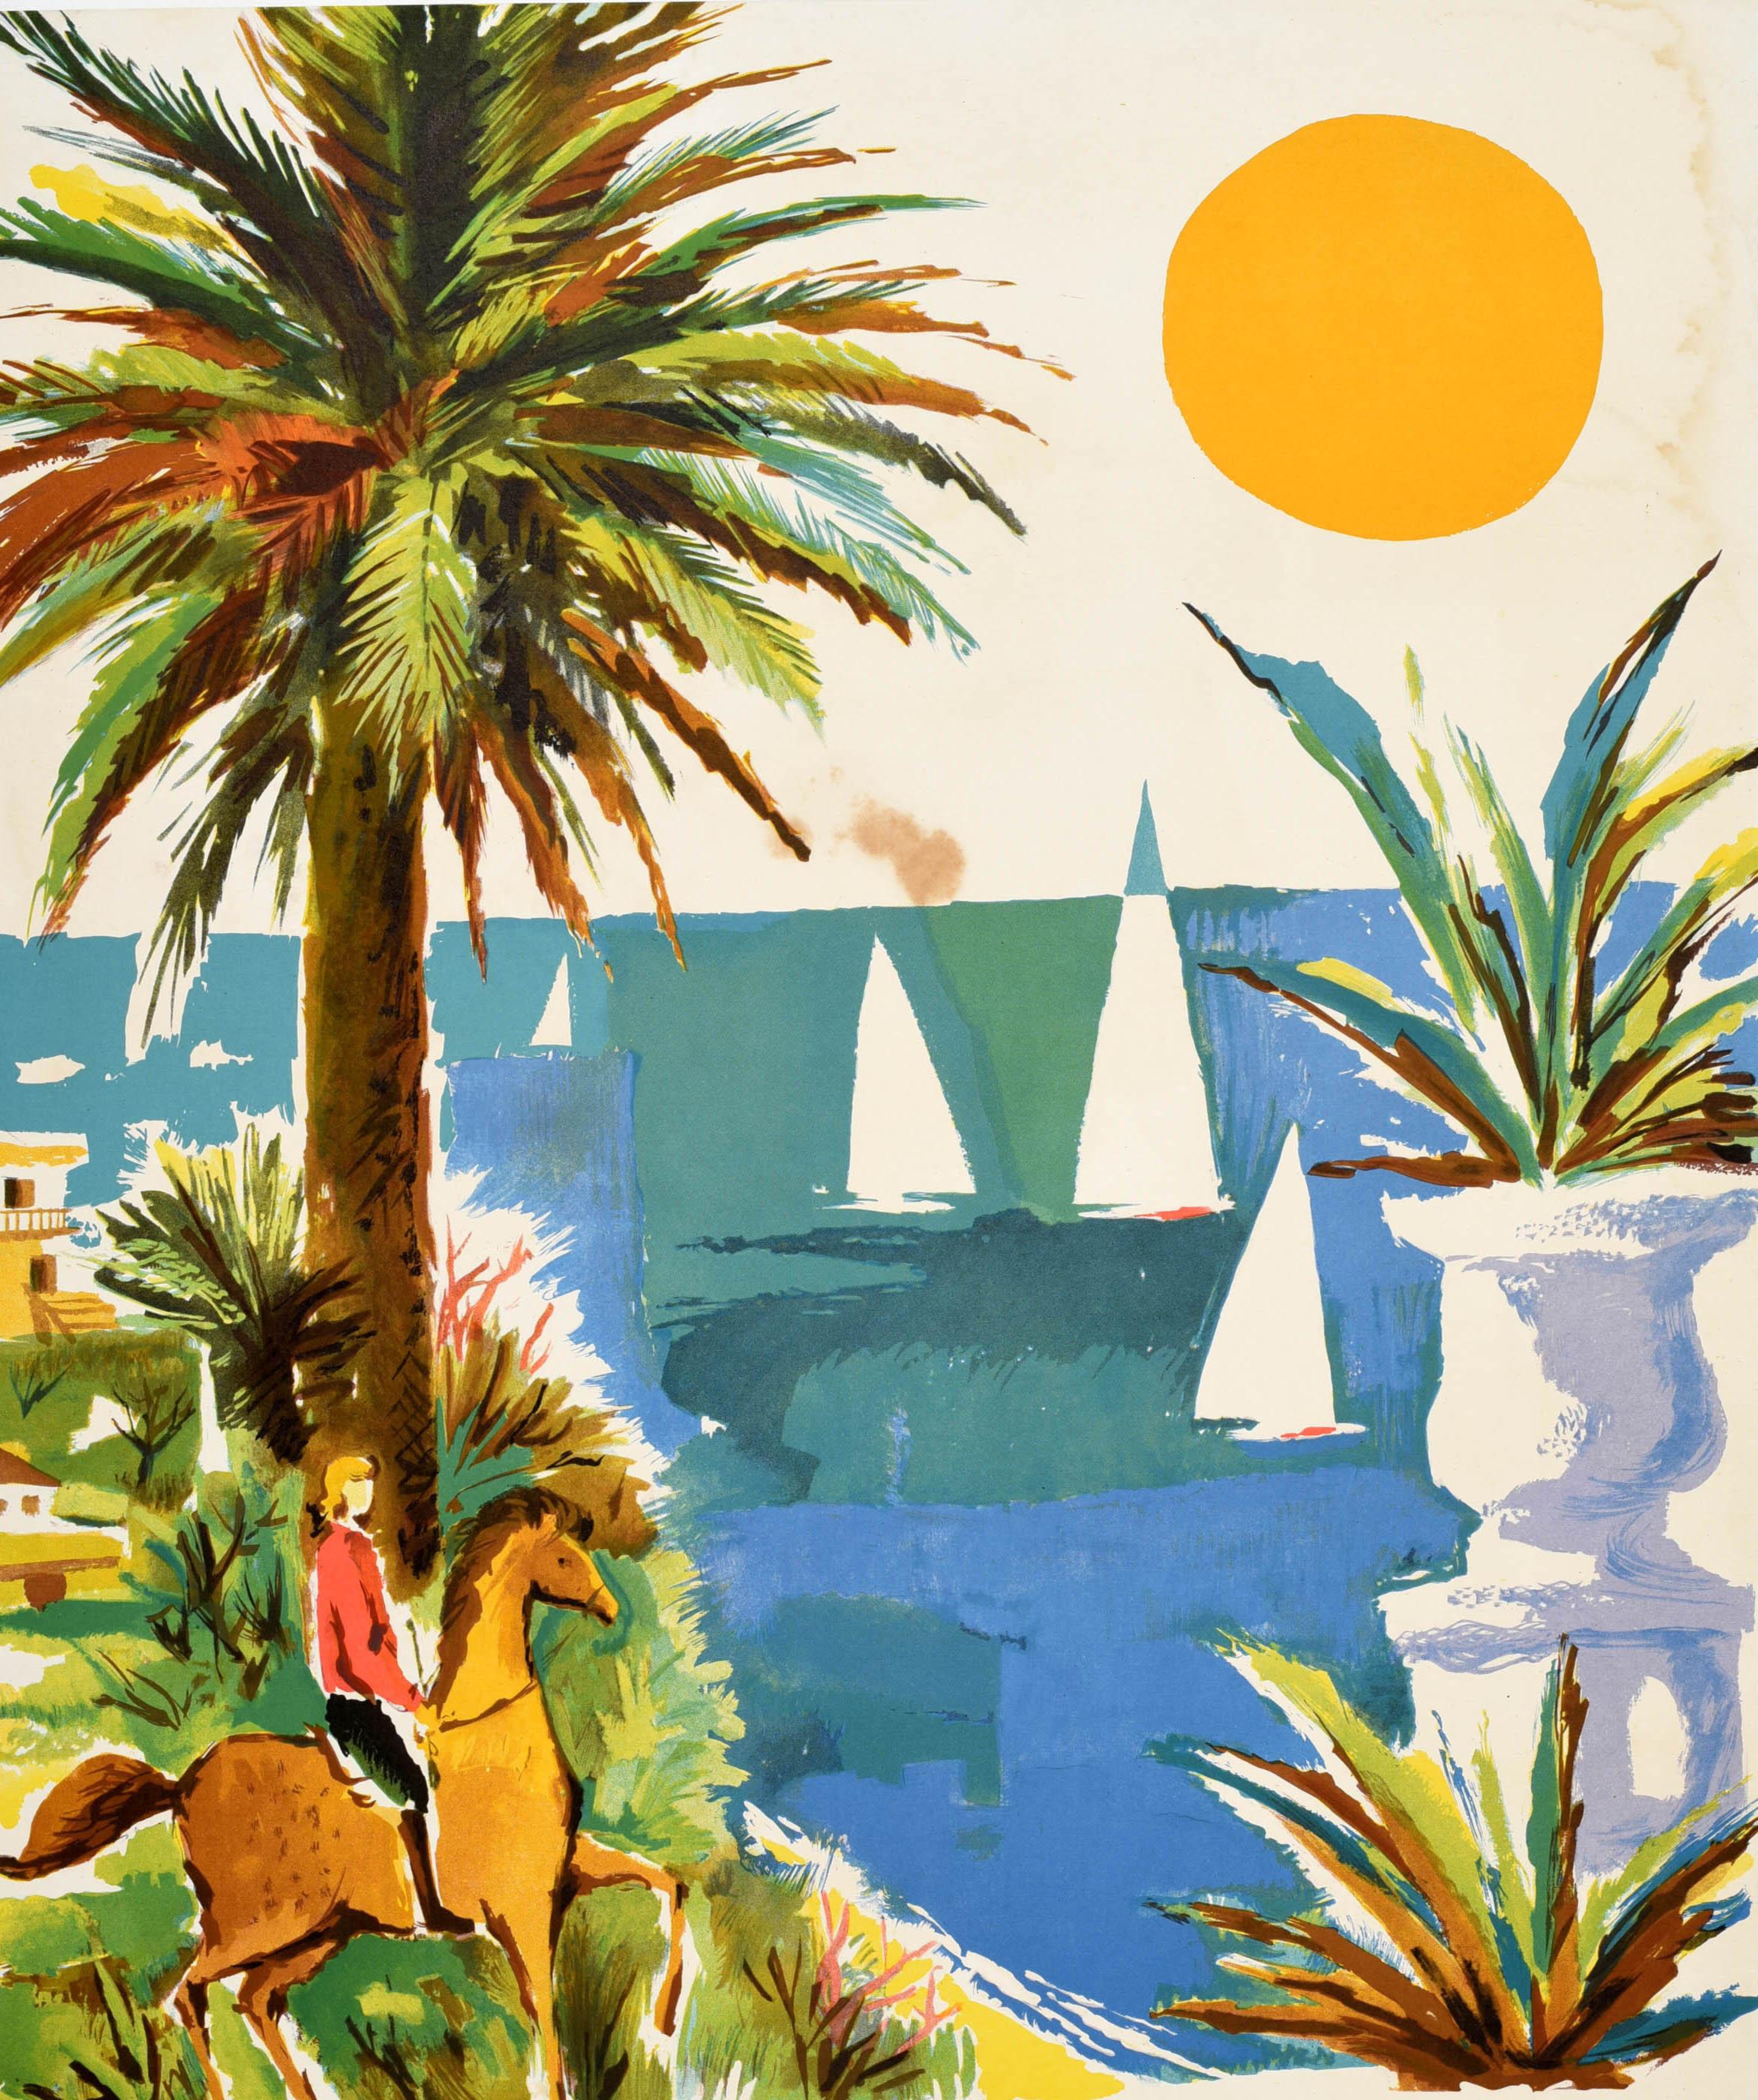 Original vintage travel poster - Estoril Portugal Vacaciones al sol / Holidays in the sun - featuring a colourful illustration of the coast with a lady riding a horse by a palm tree in the foreground, a sandy beach with sailing boats at sea and a